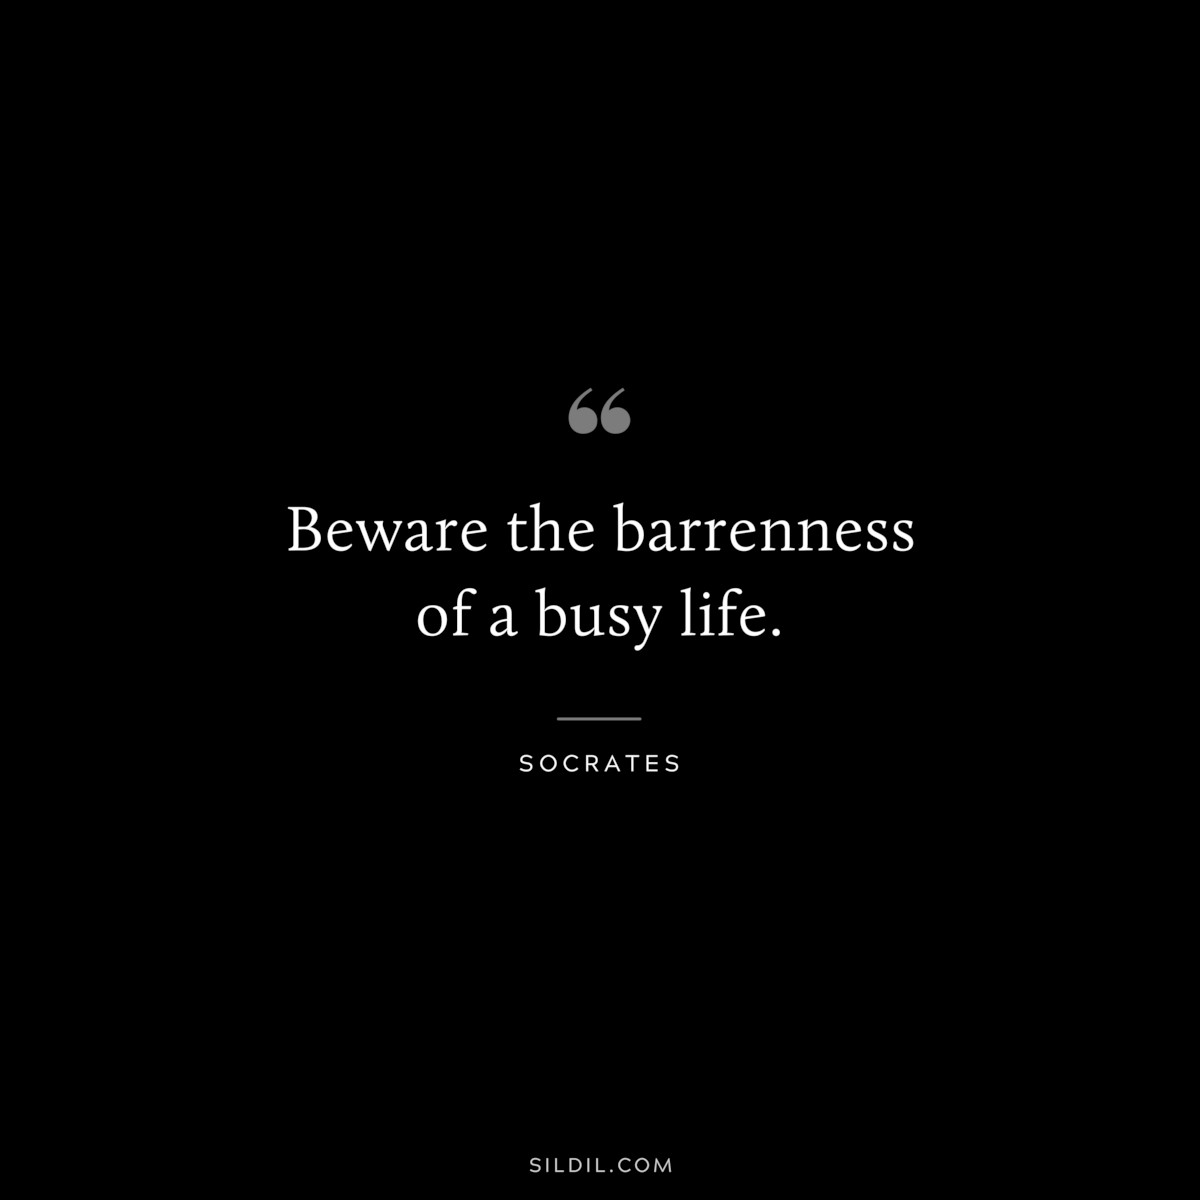 Beware the barrenness of a busy life. ― Socrates